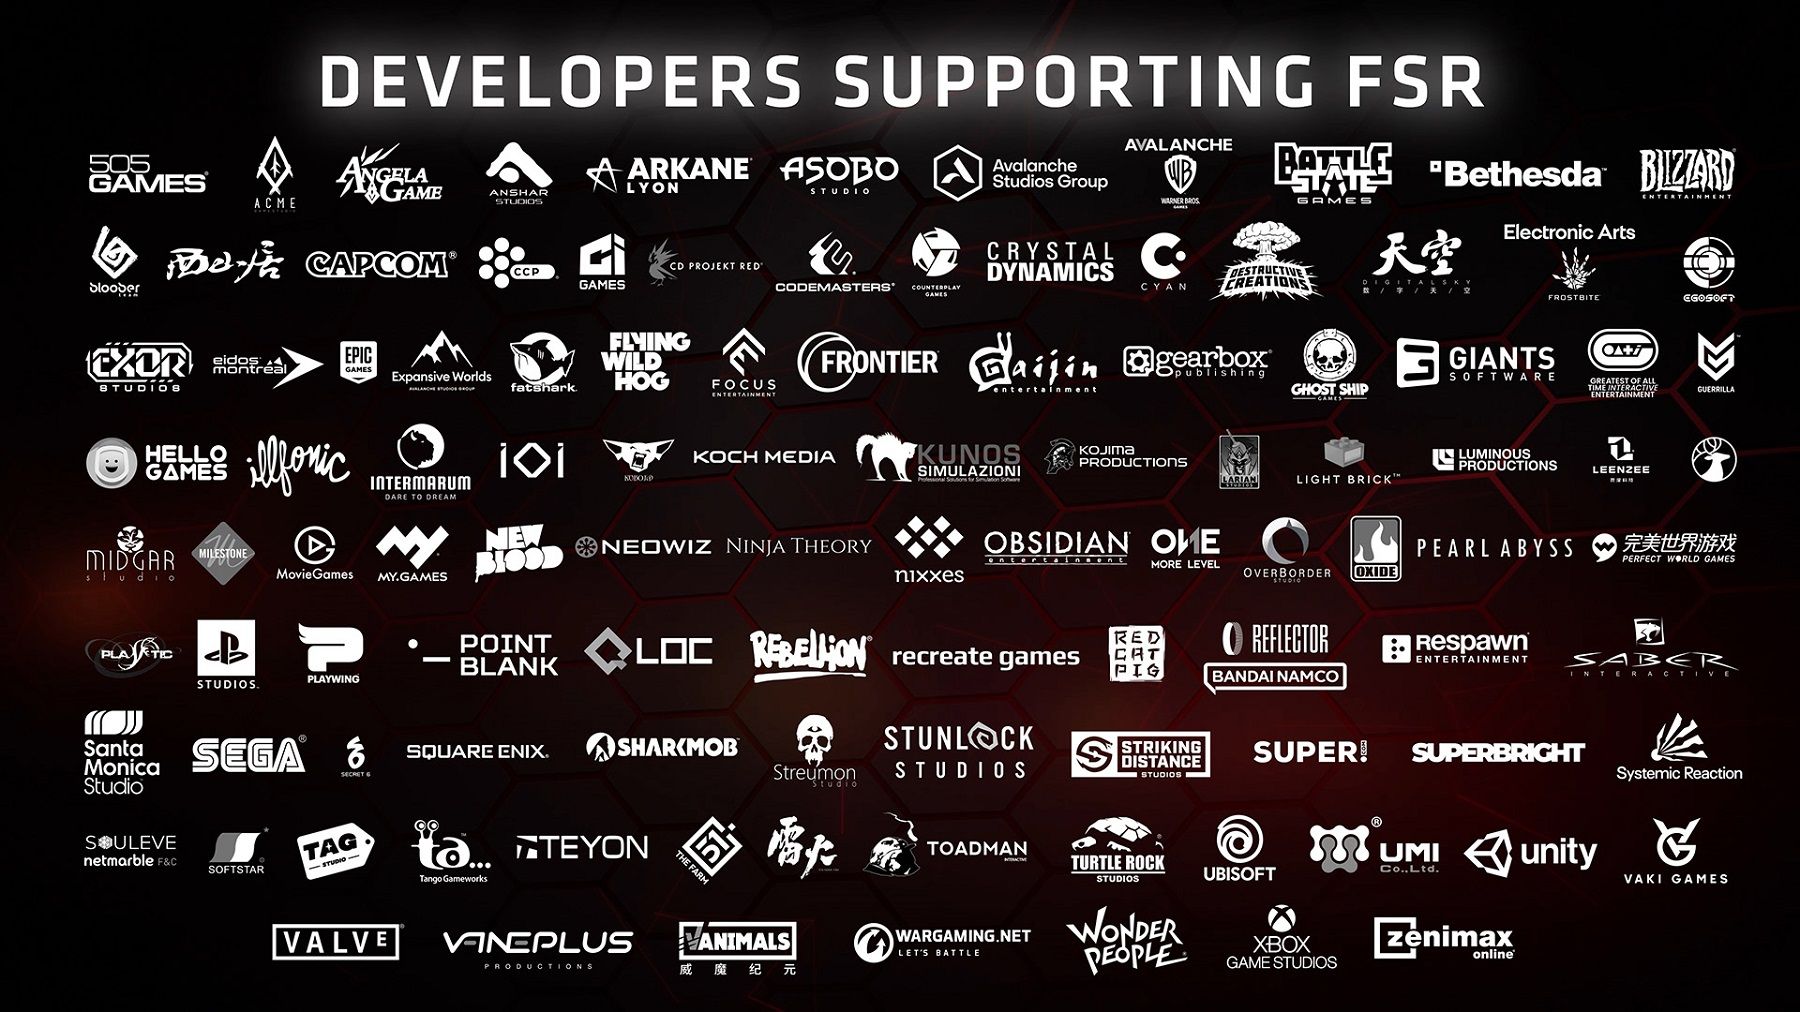 Infographic showing all the development studios that support AMD's FSR upscaling tech.